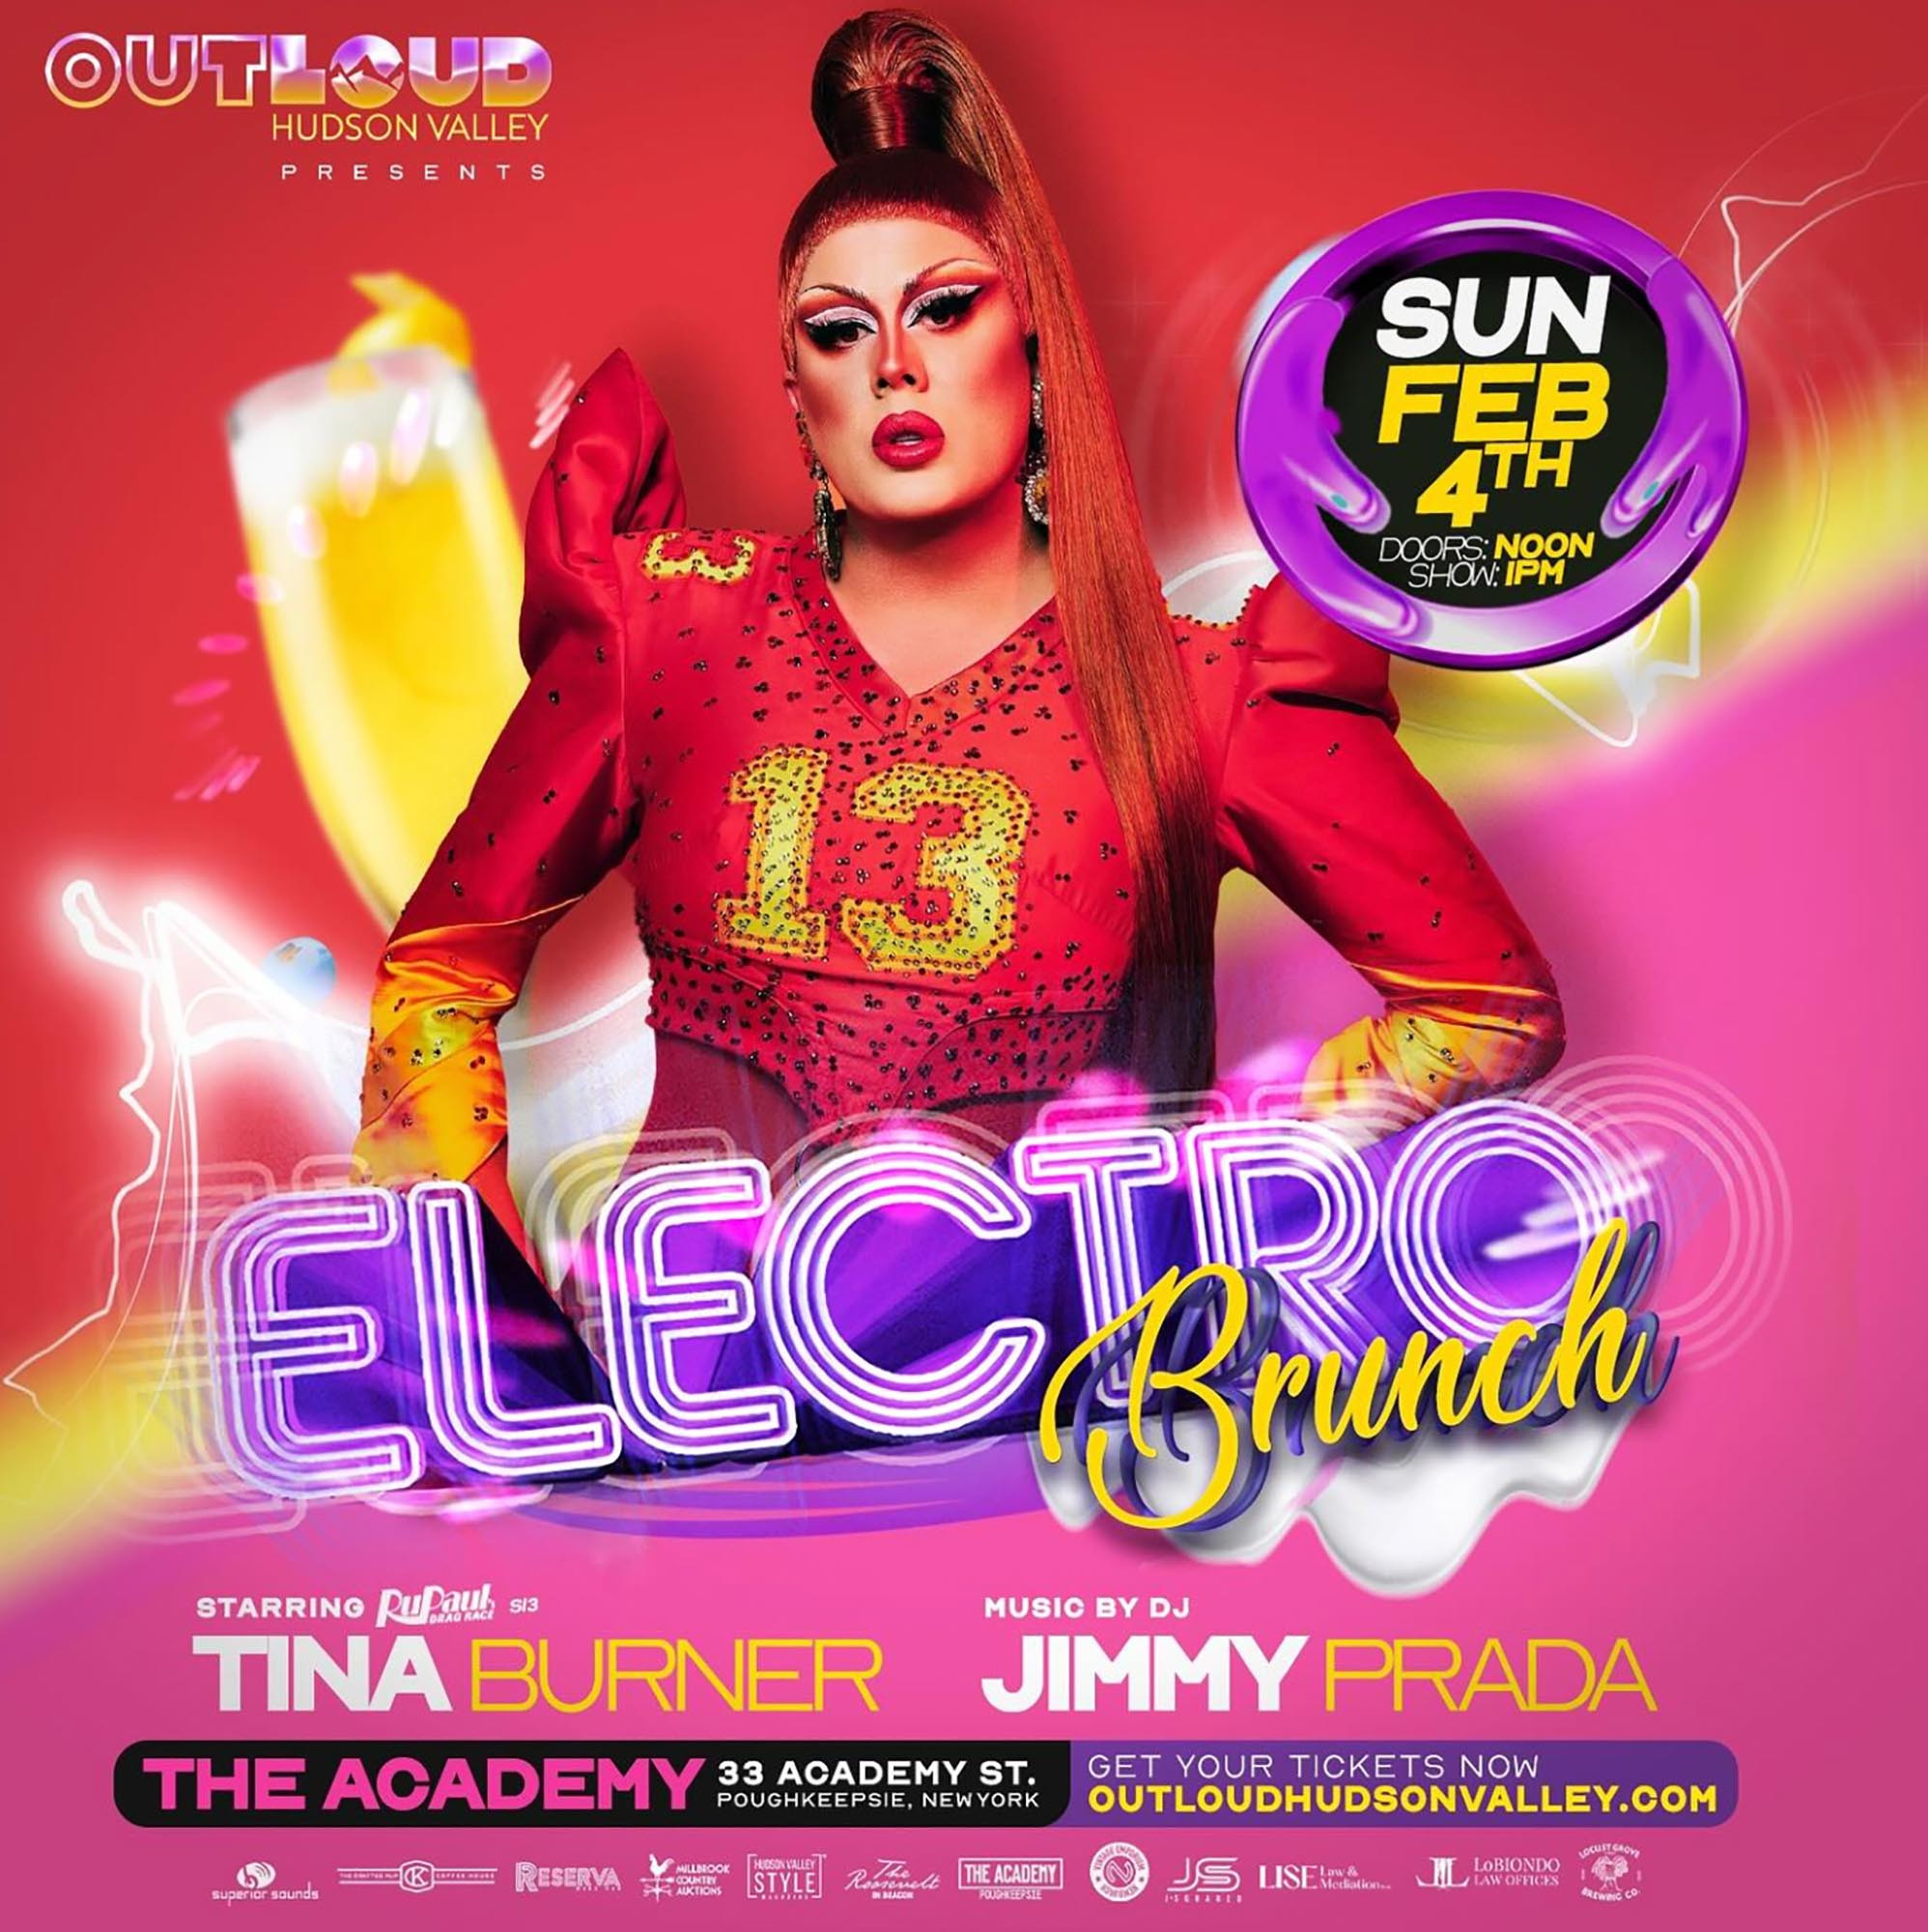 Sparkles and Brunch: Don't Miss Tina Burner's Electro Drag Brunch in Poughkeepsie! – Things to do in Hudson Valley – Presented by Out Loud Hudson Valley